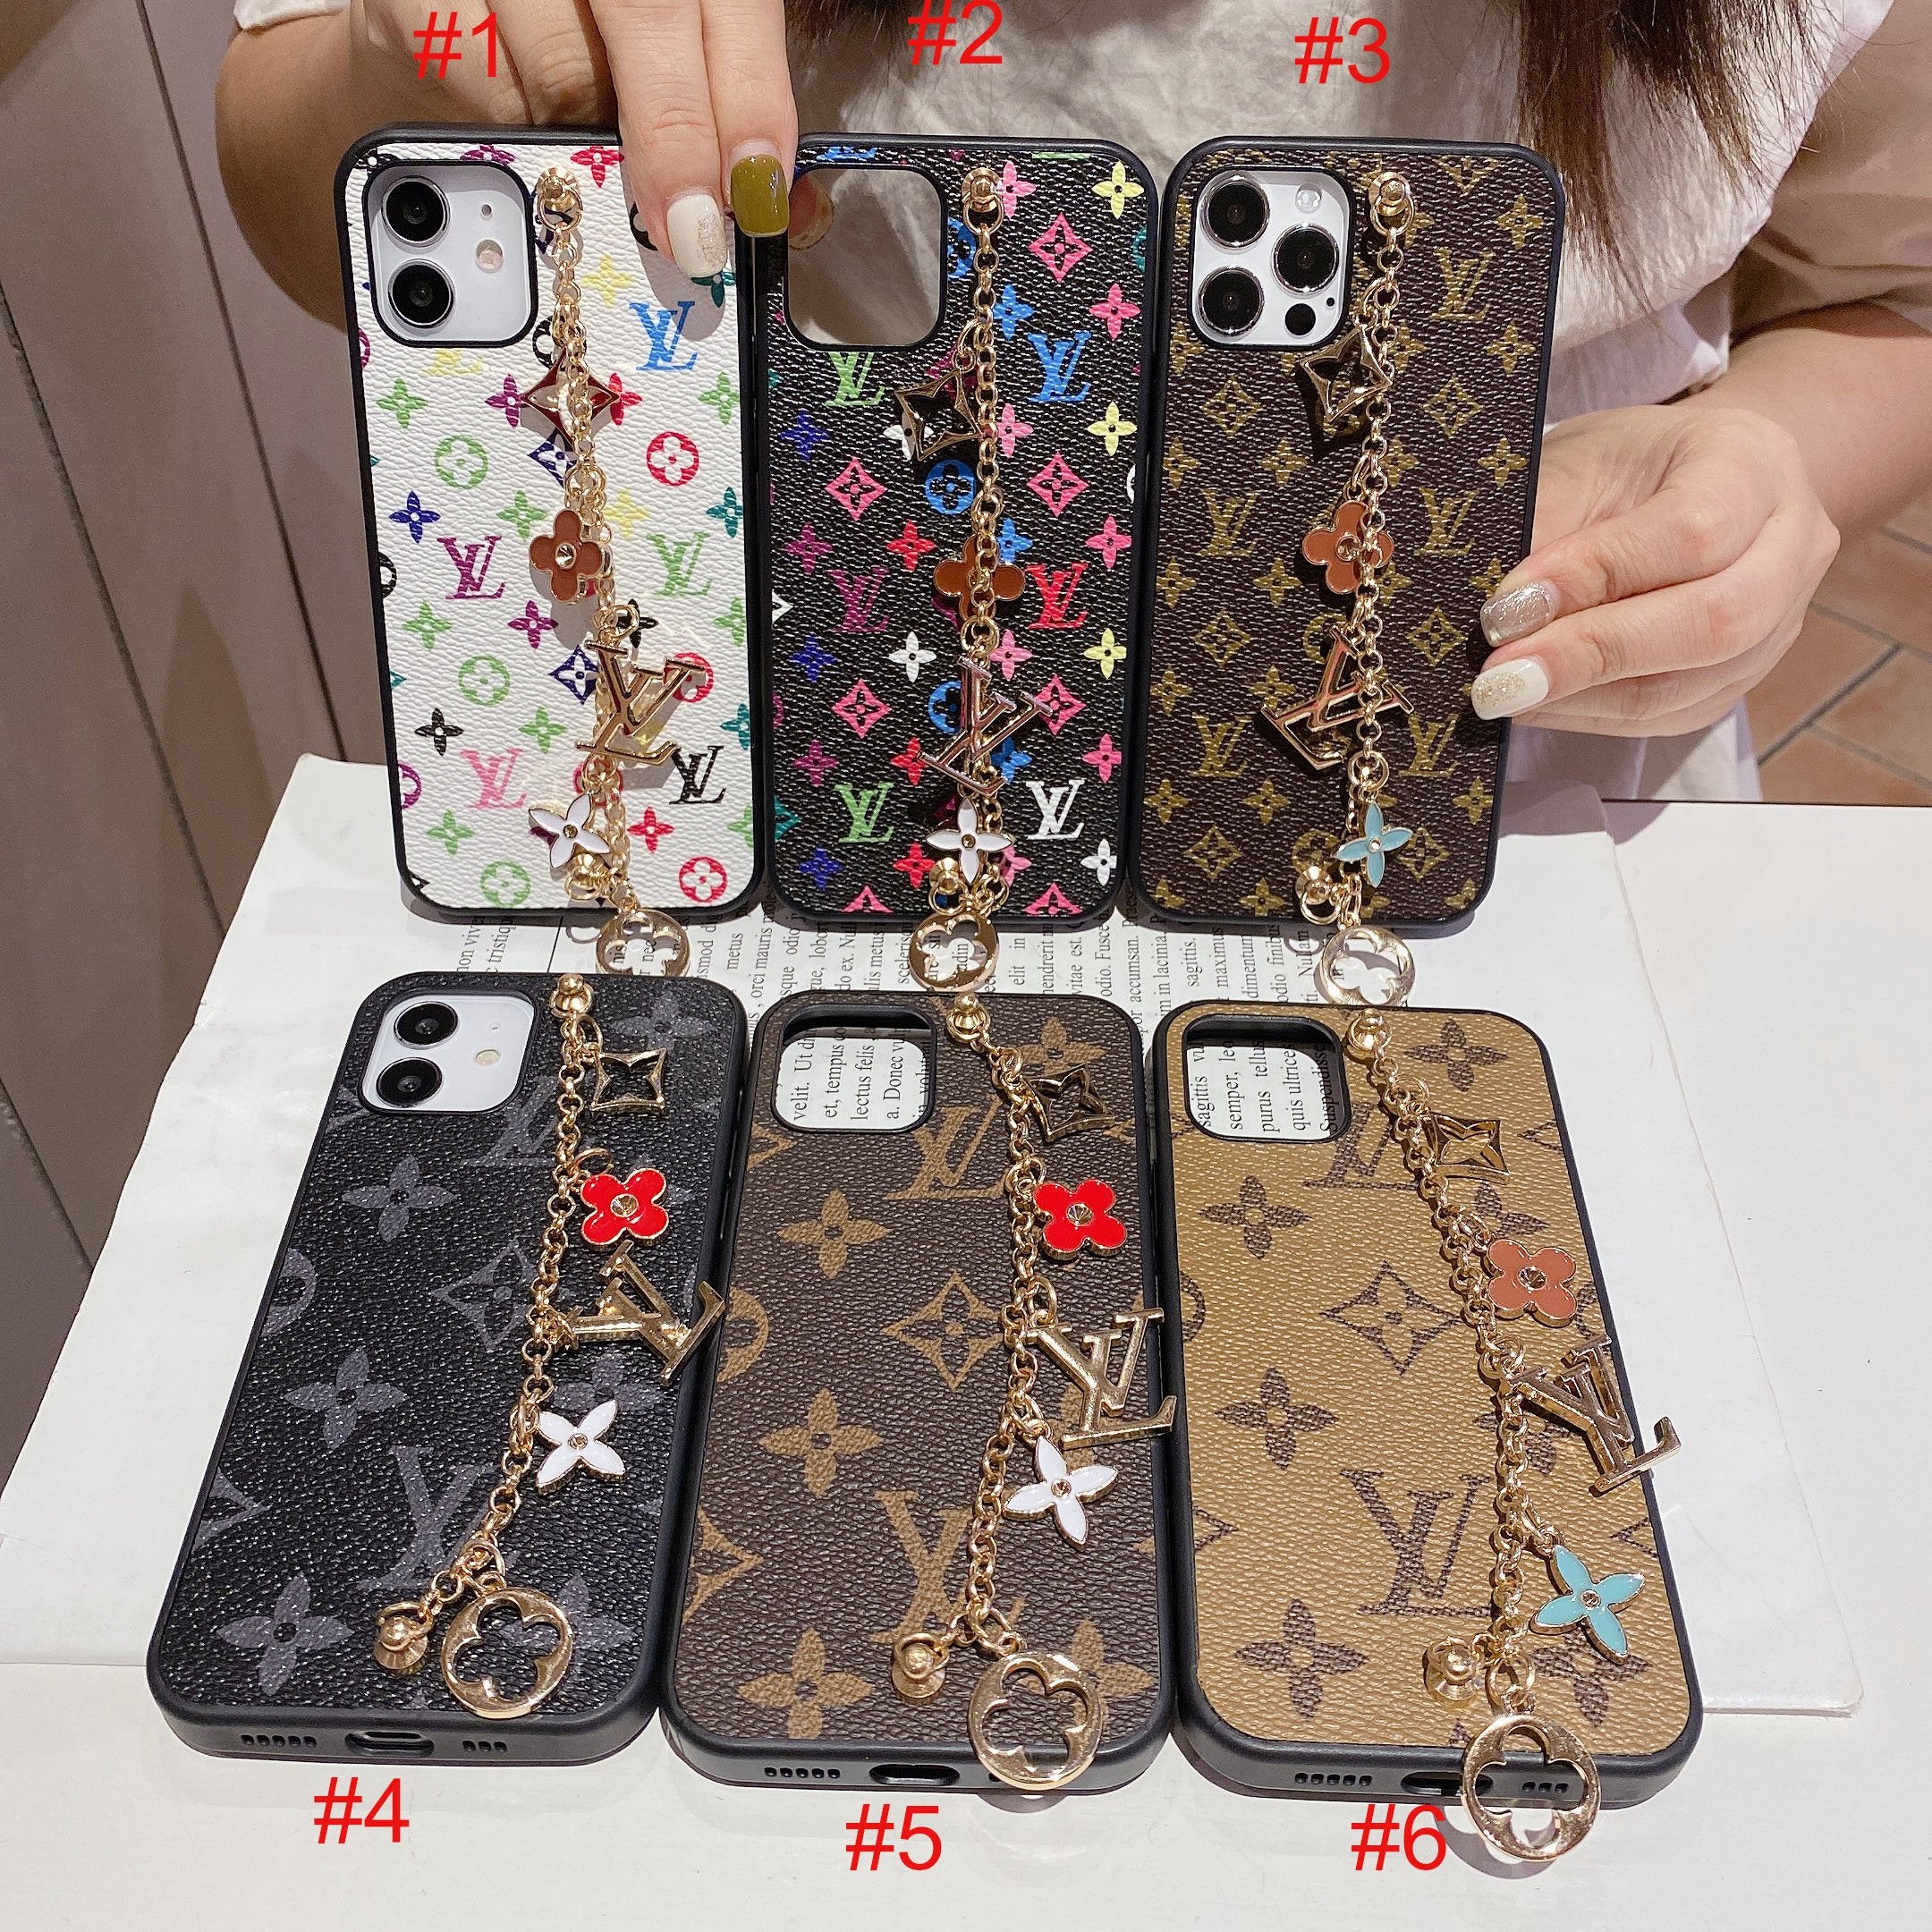 Louis Vuitton LV Fashion iPhone Phone Cover Case For iphone 7 7p